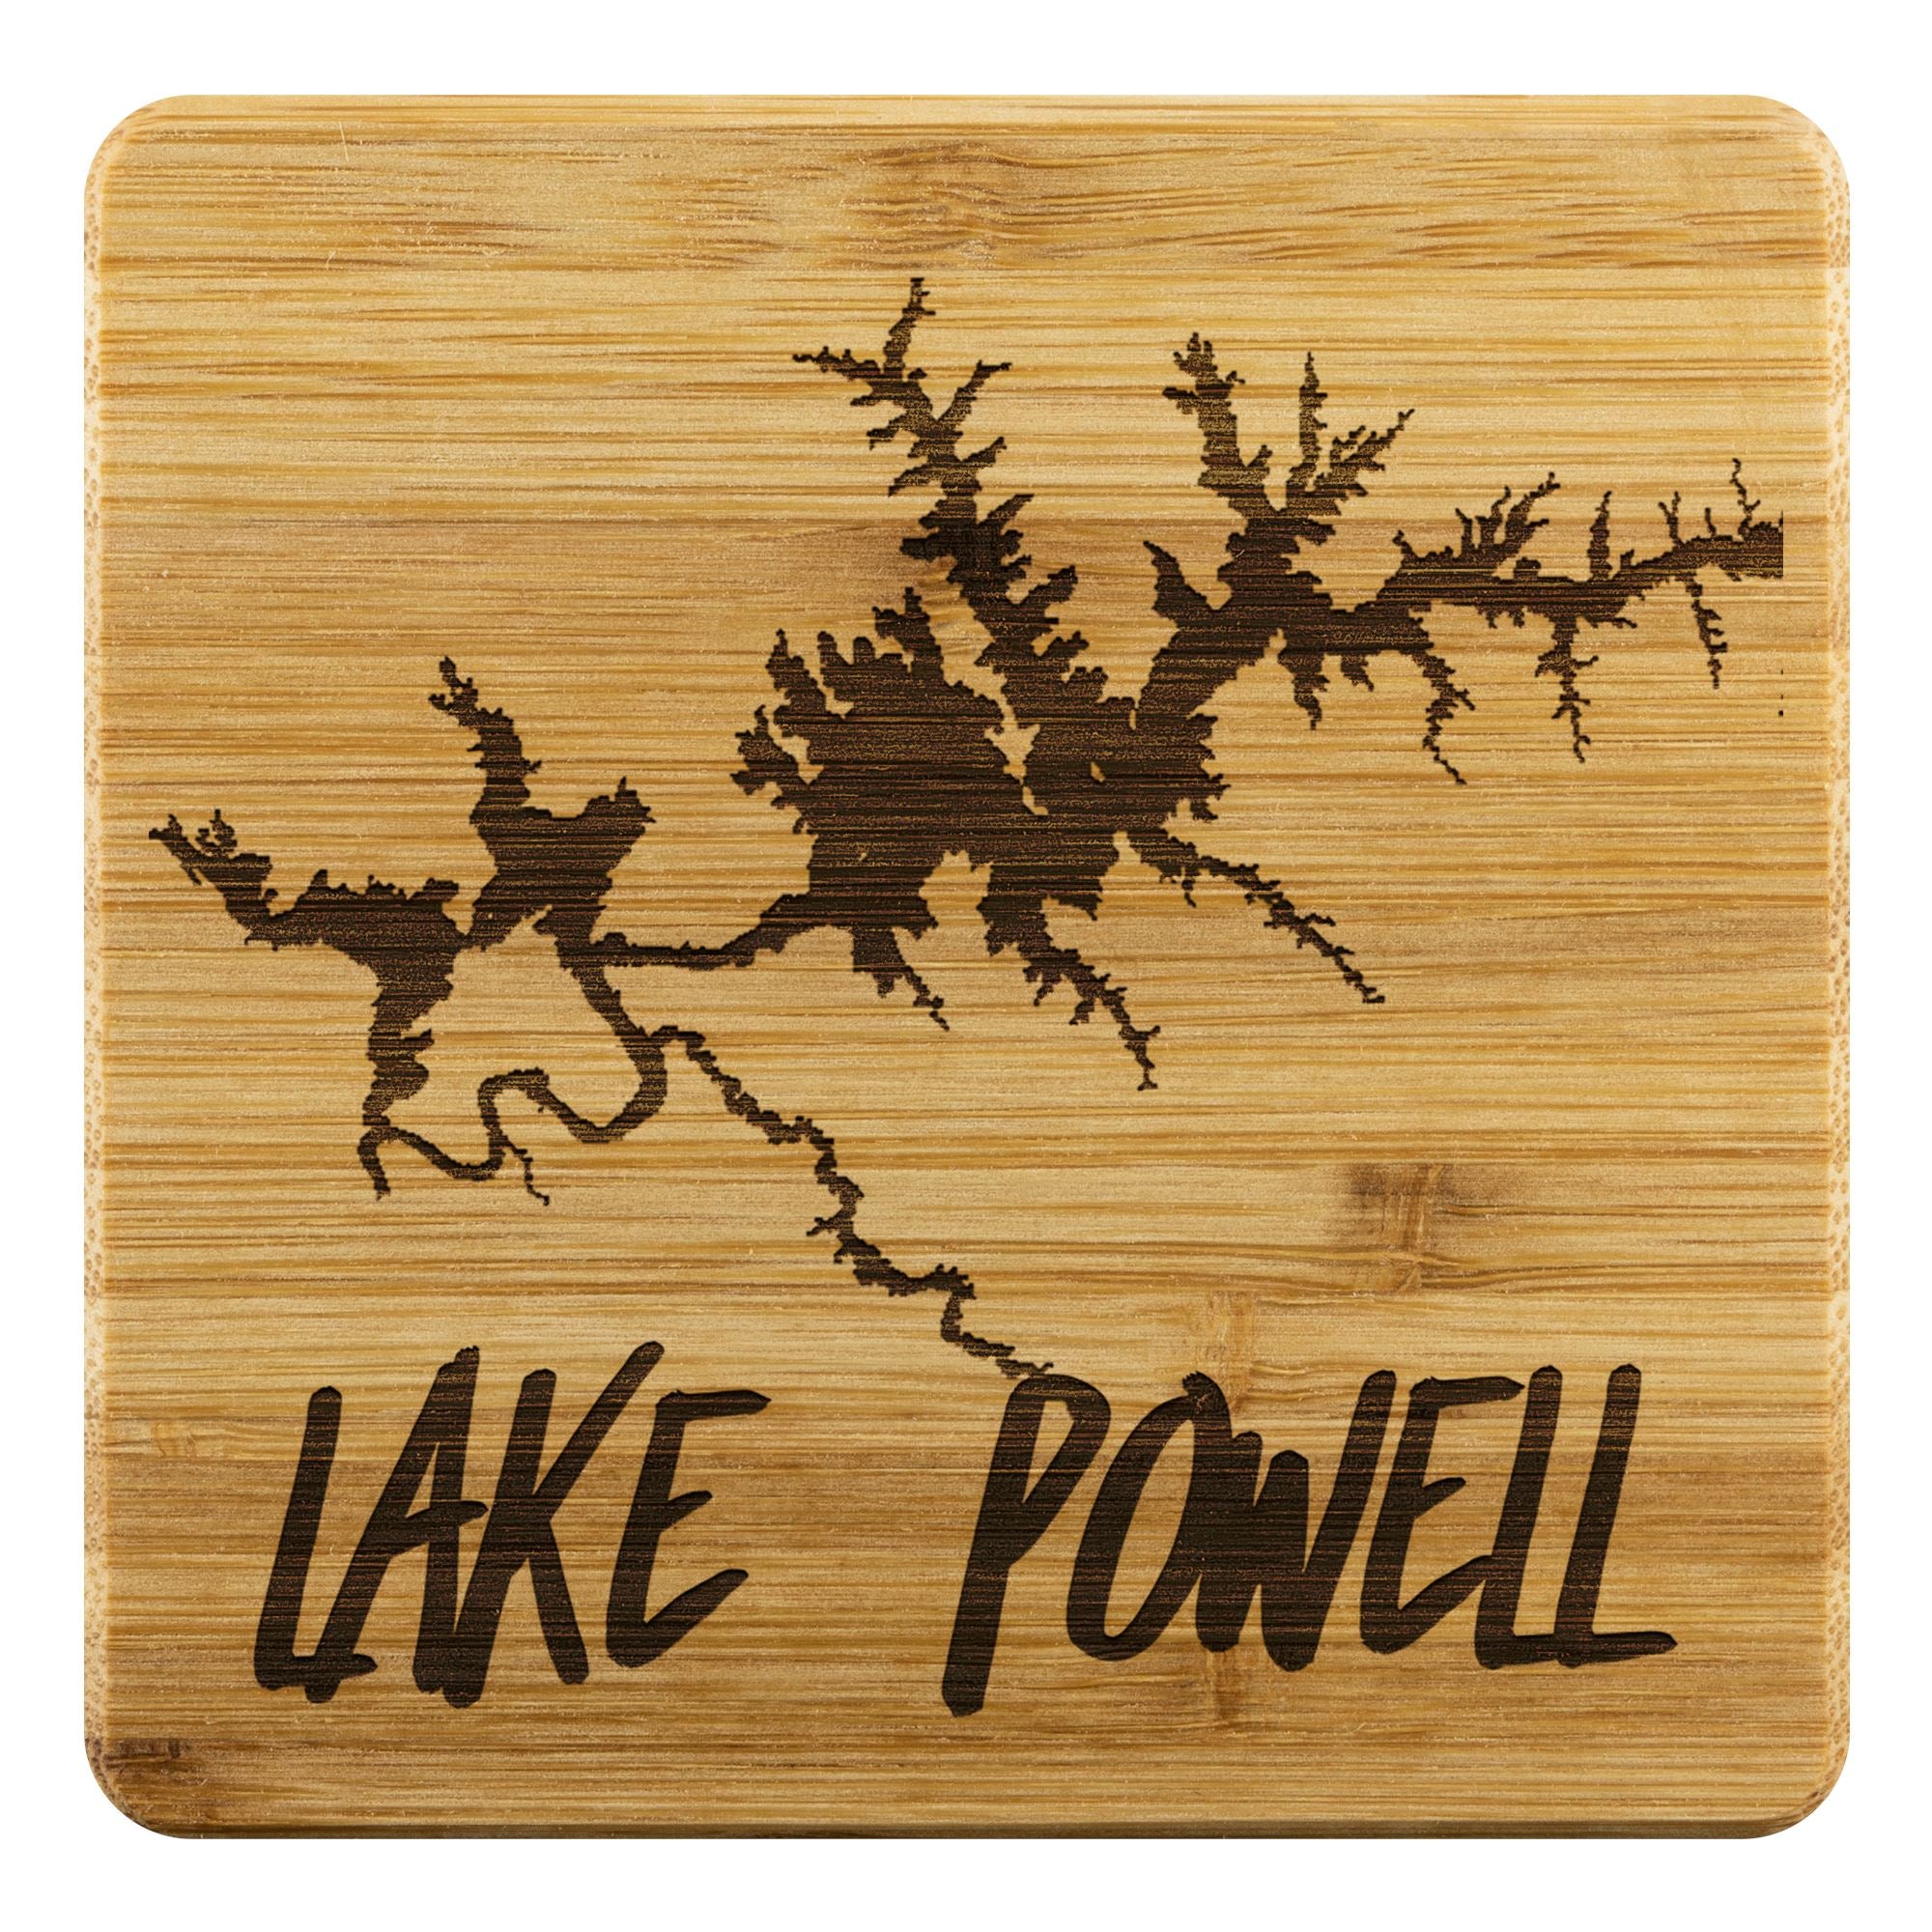 Lake Powell Bamboo Coaster | Laser Etched | 4-Pack | Lake Gift - Houseboat Kings